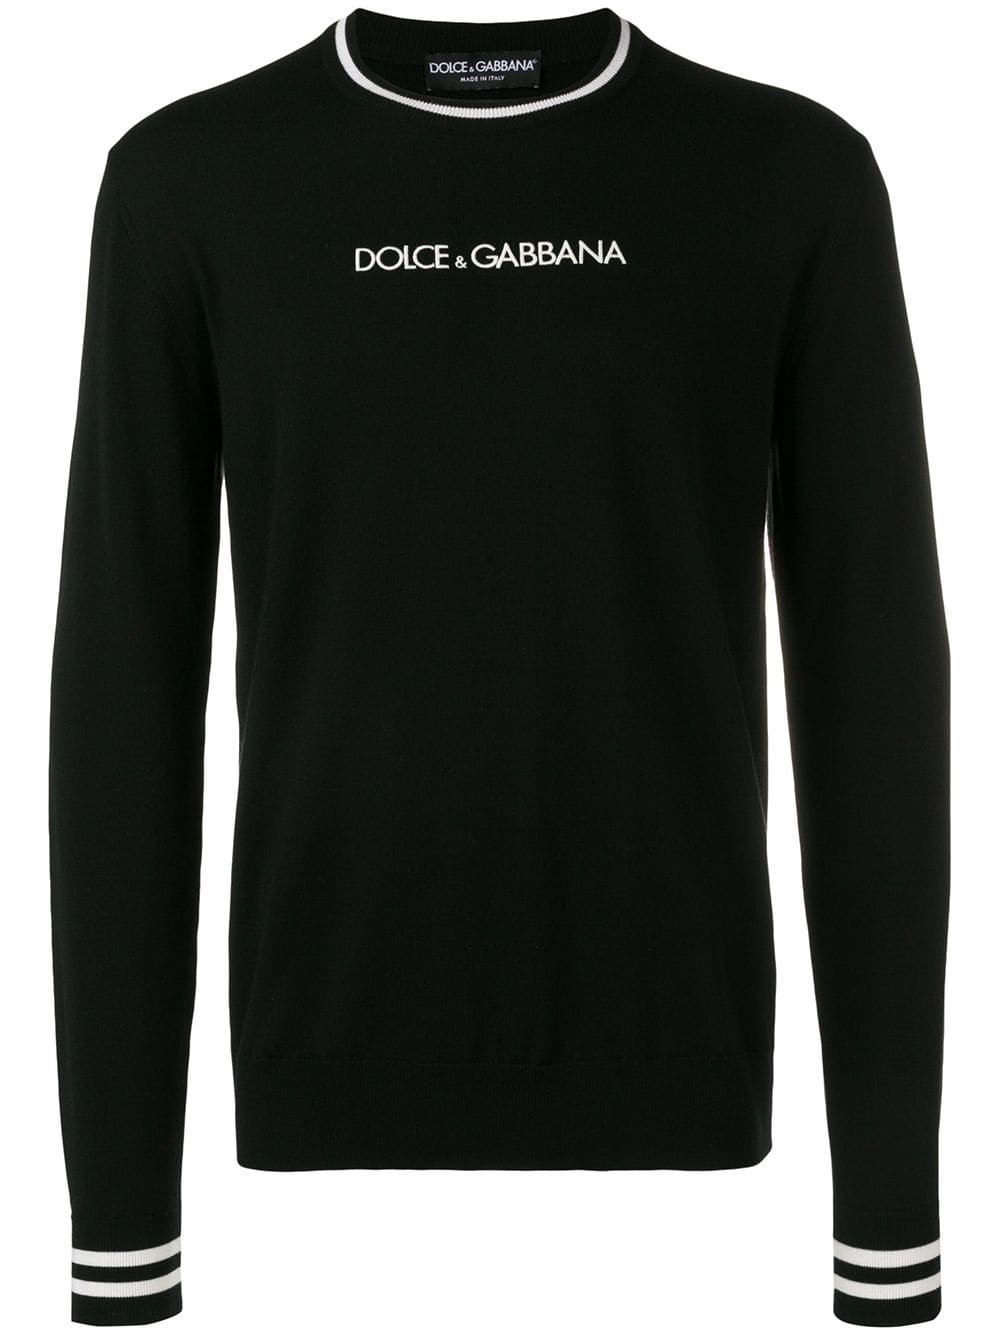 dolce & gabbana LOGO PULLOVER available on montiboutique.com - 26329